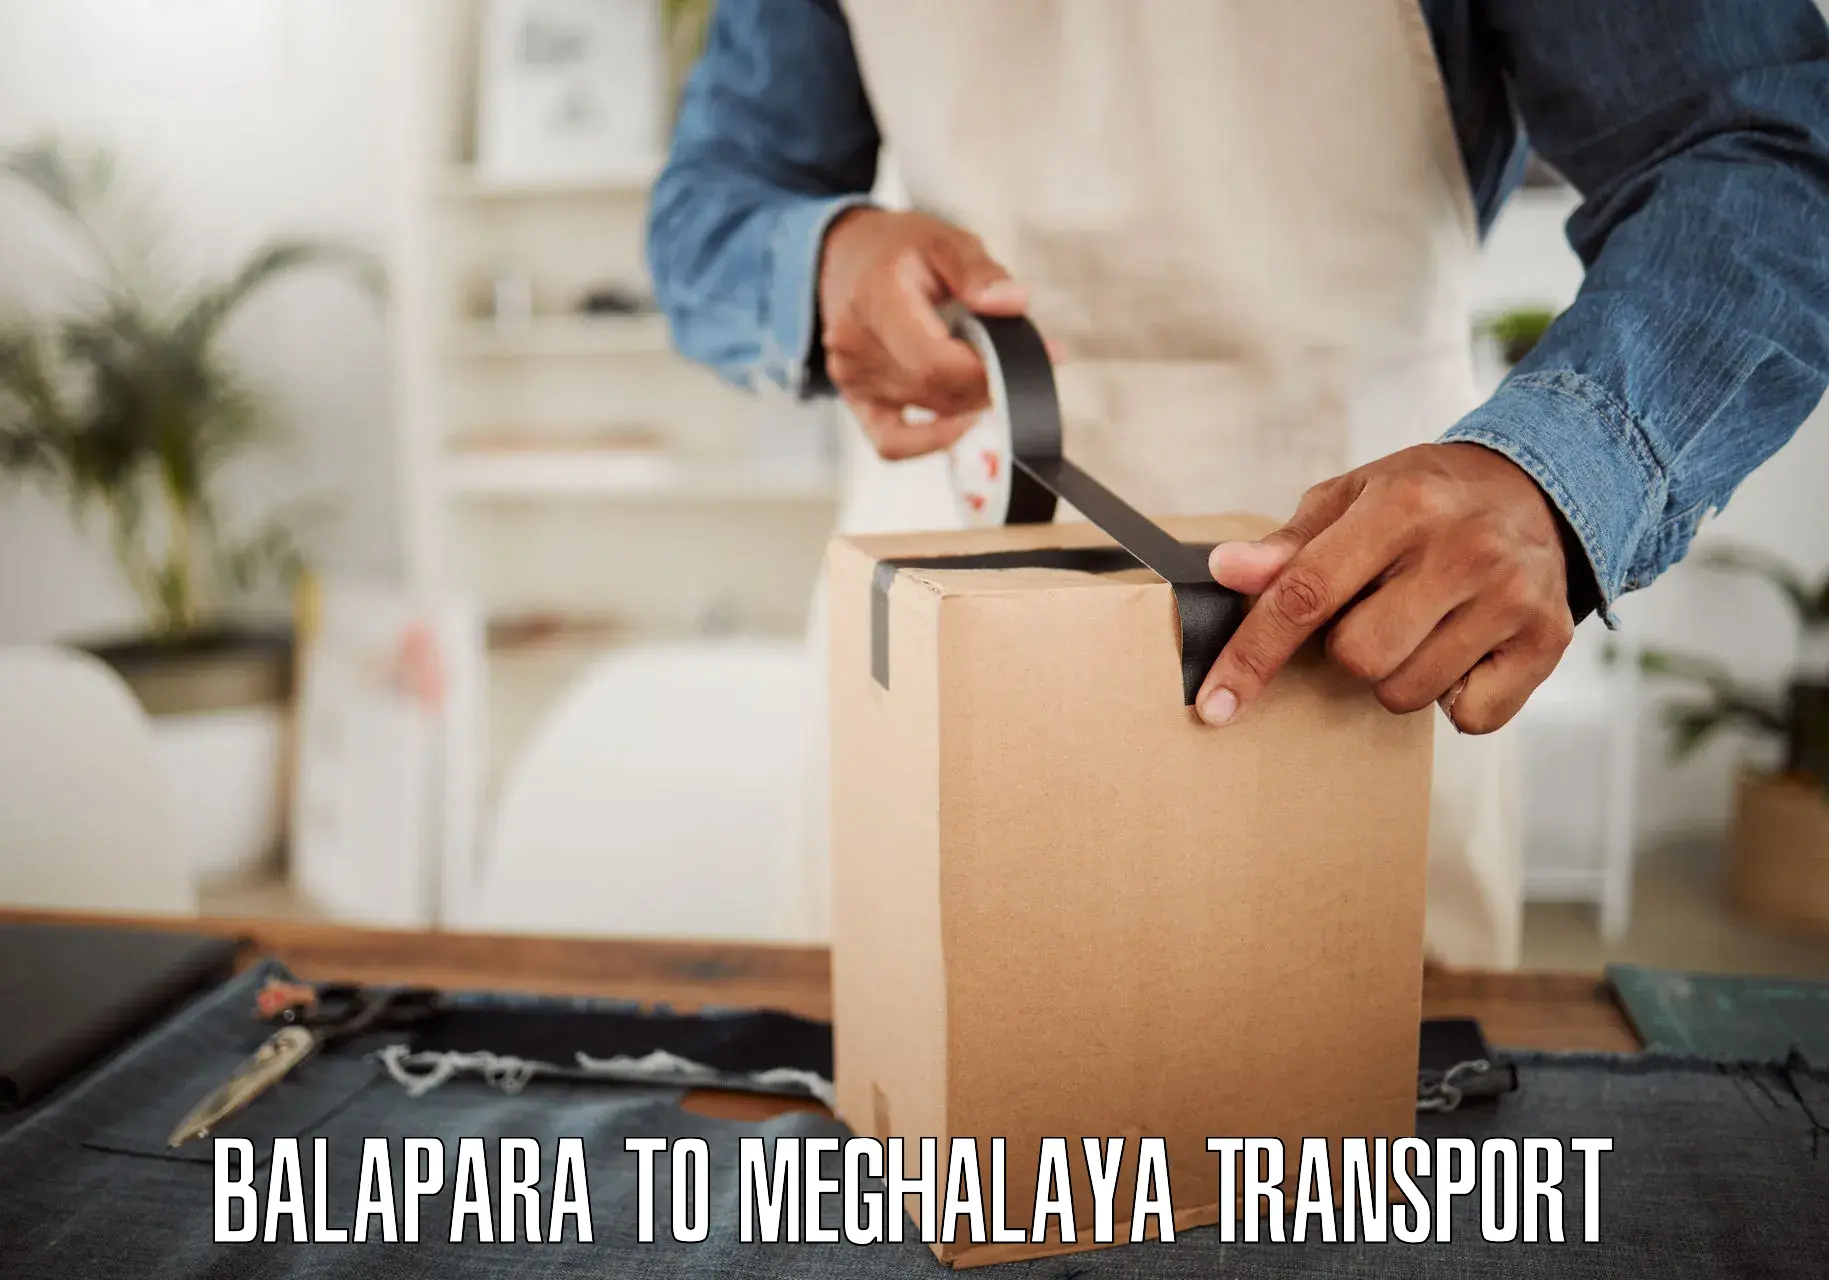 Truck transport companies in India Balapara to Shillong